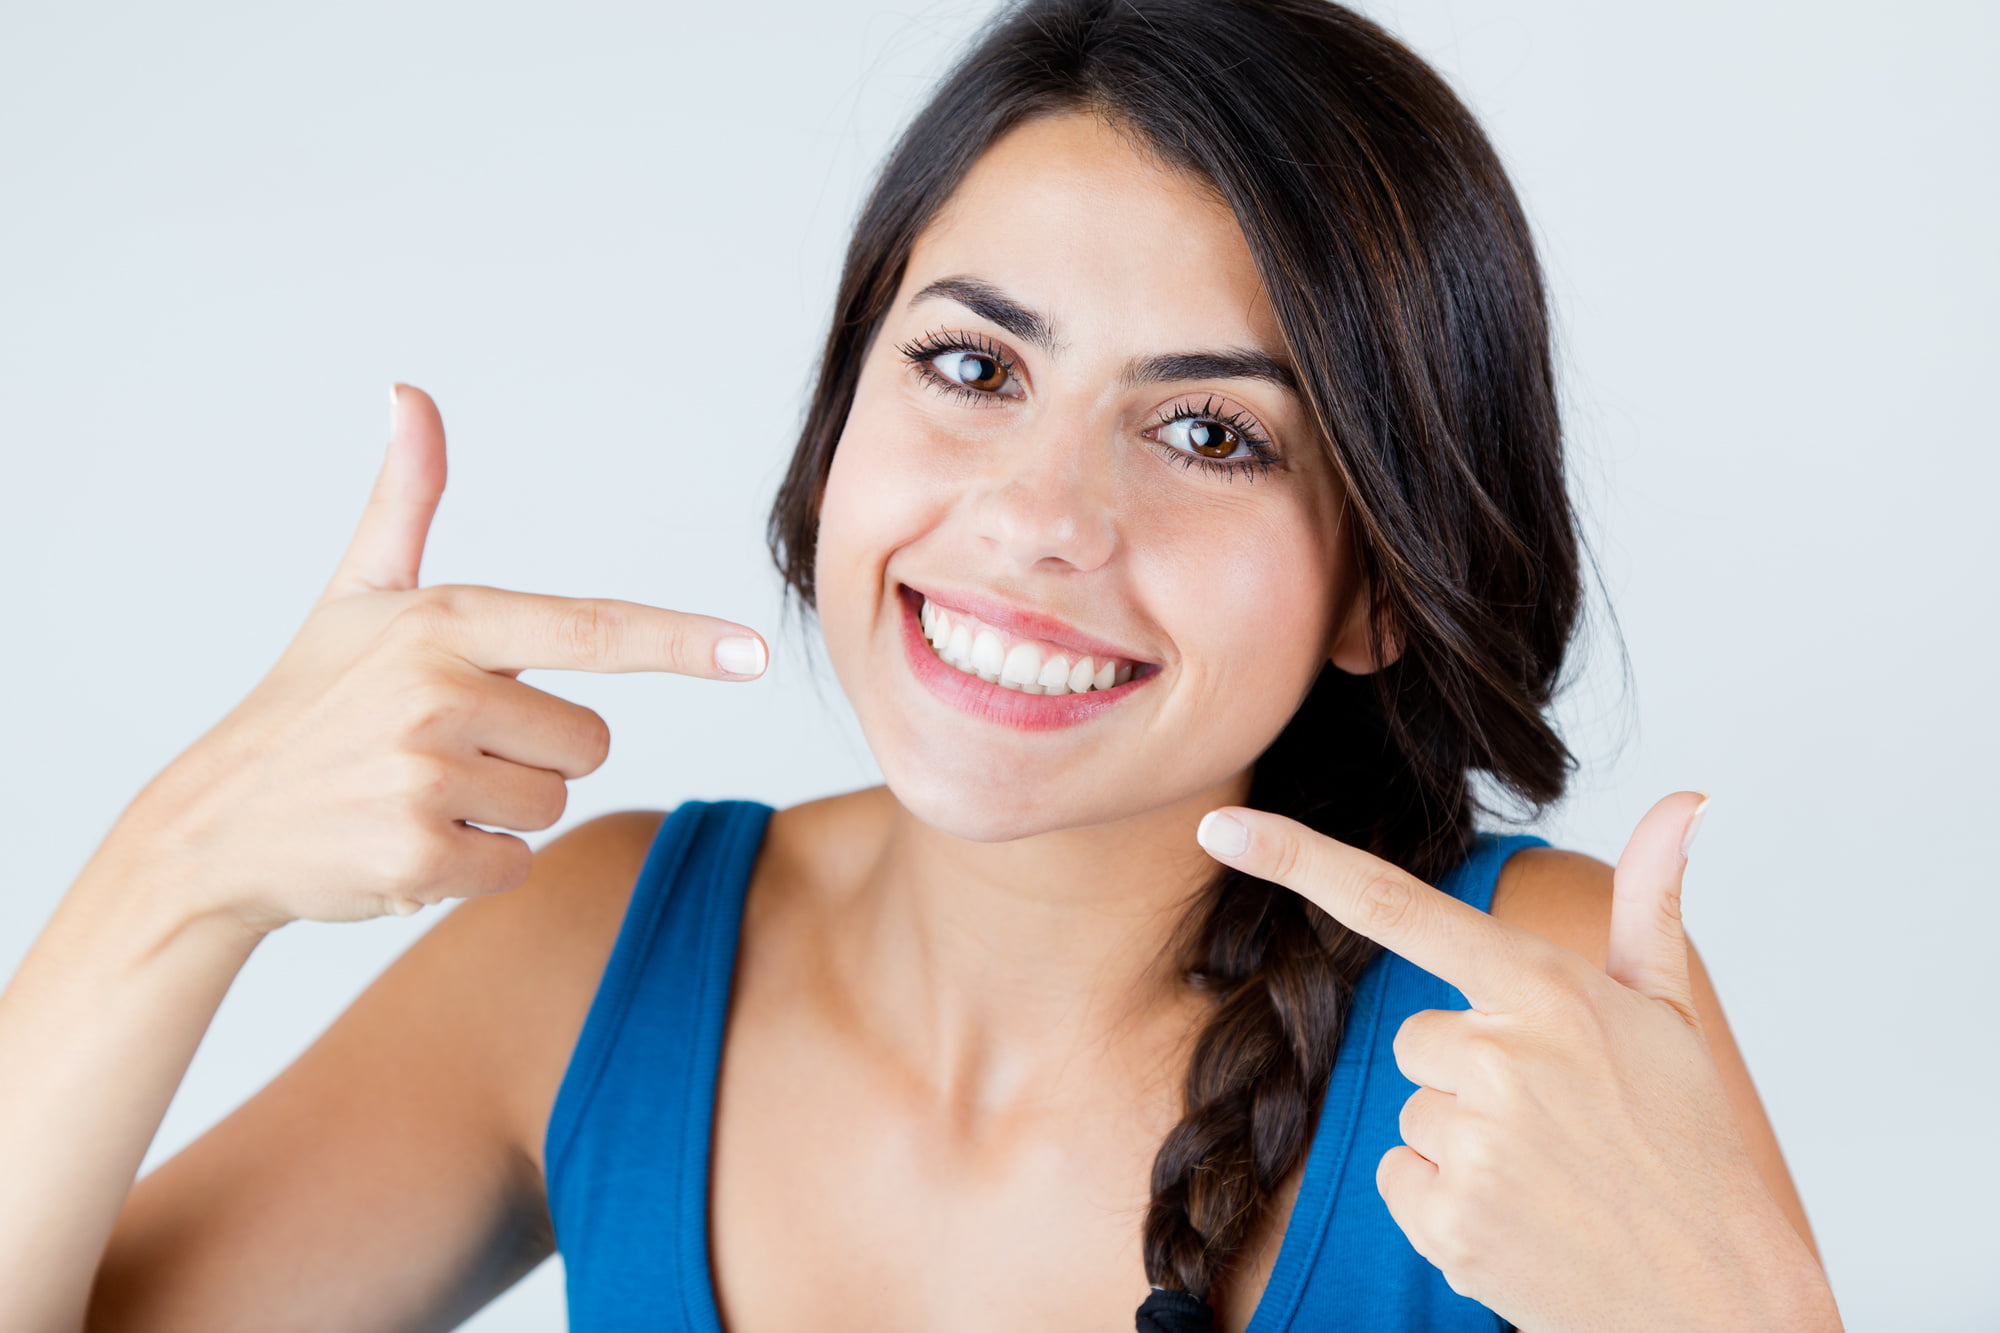 Having great teeth will really help you feel more confident. Check out this guide for some tips on how to get a better smile.